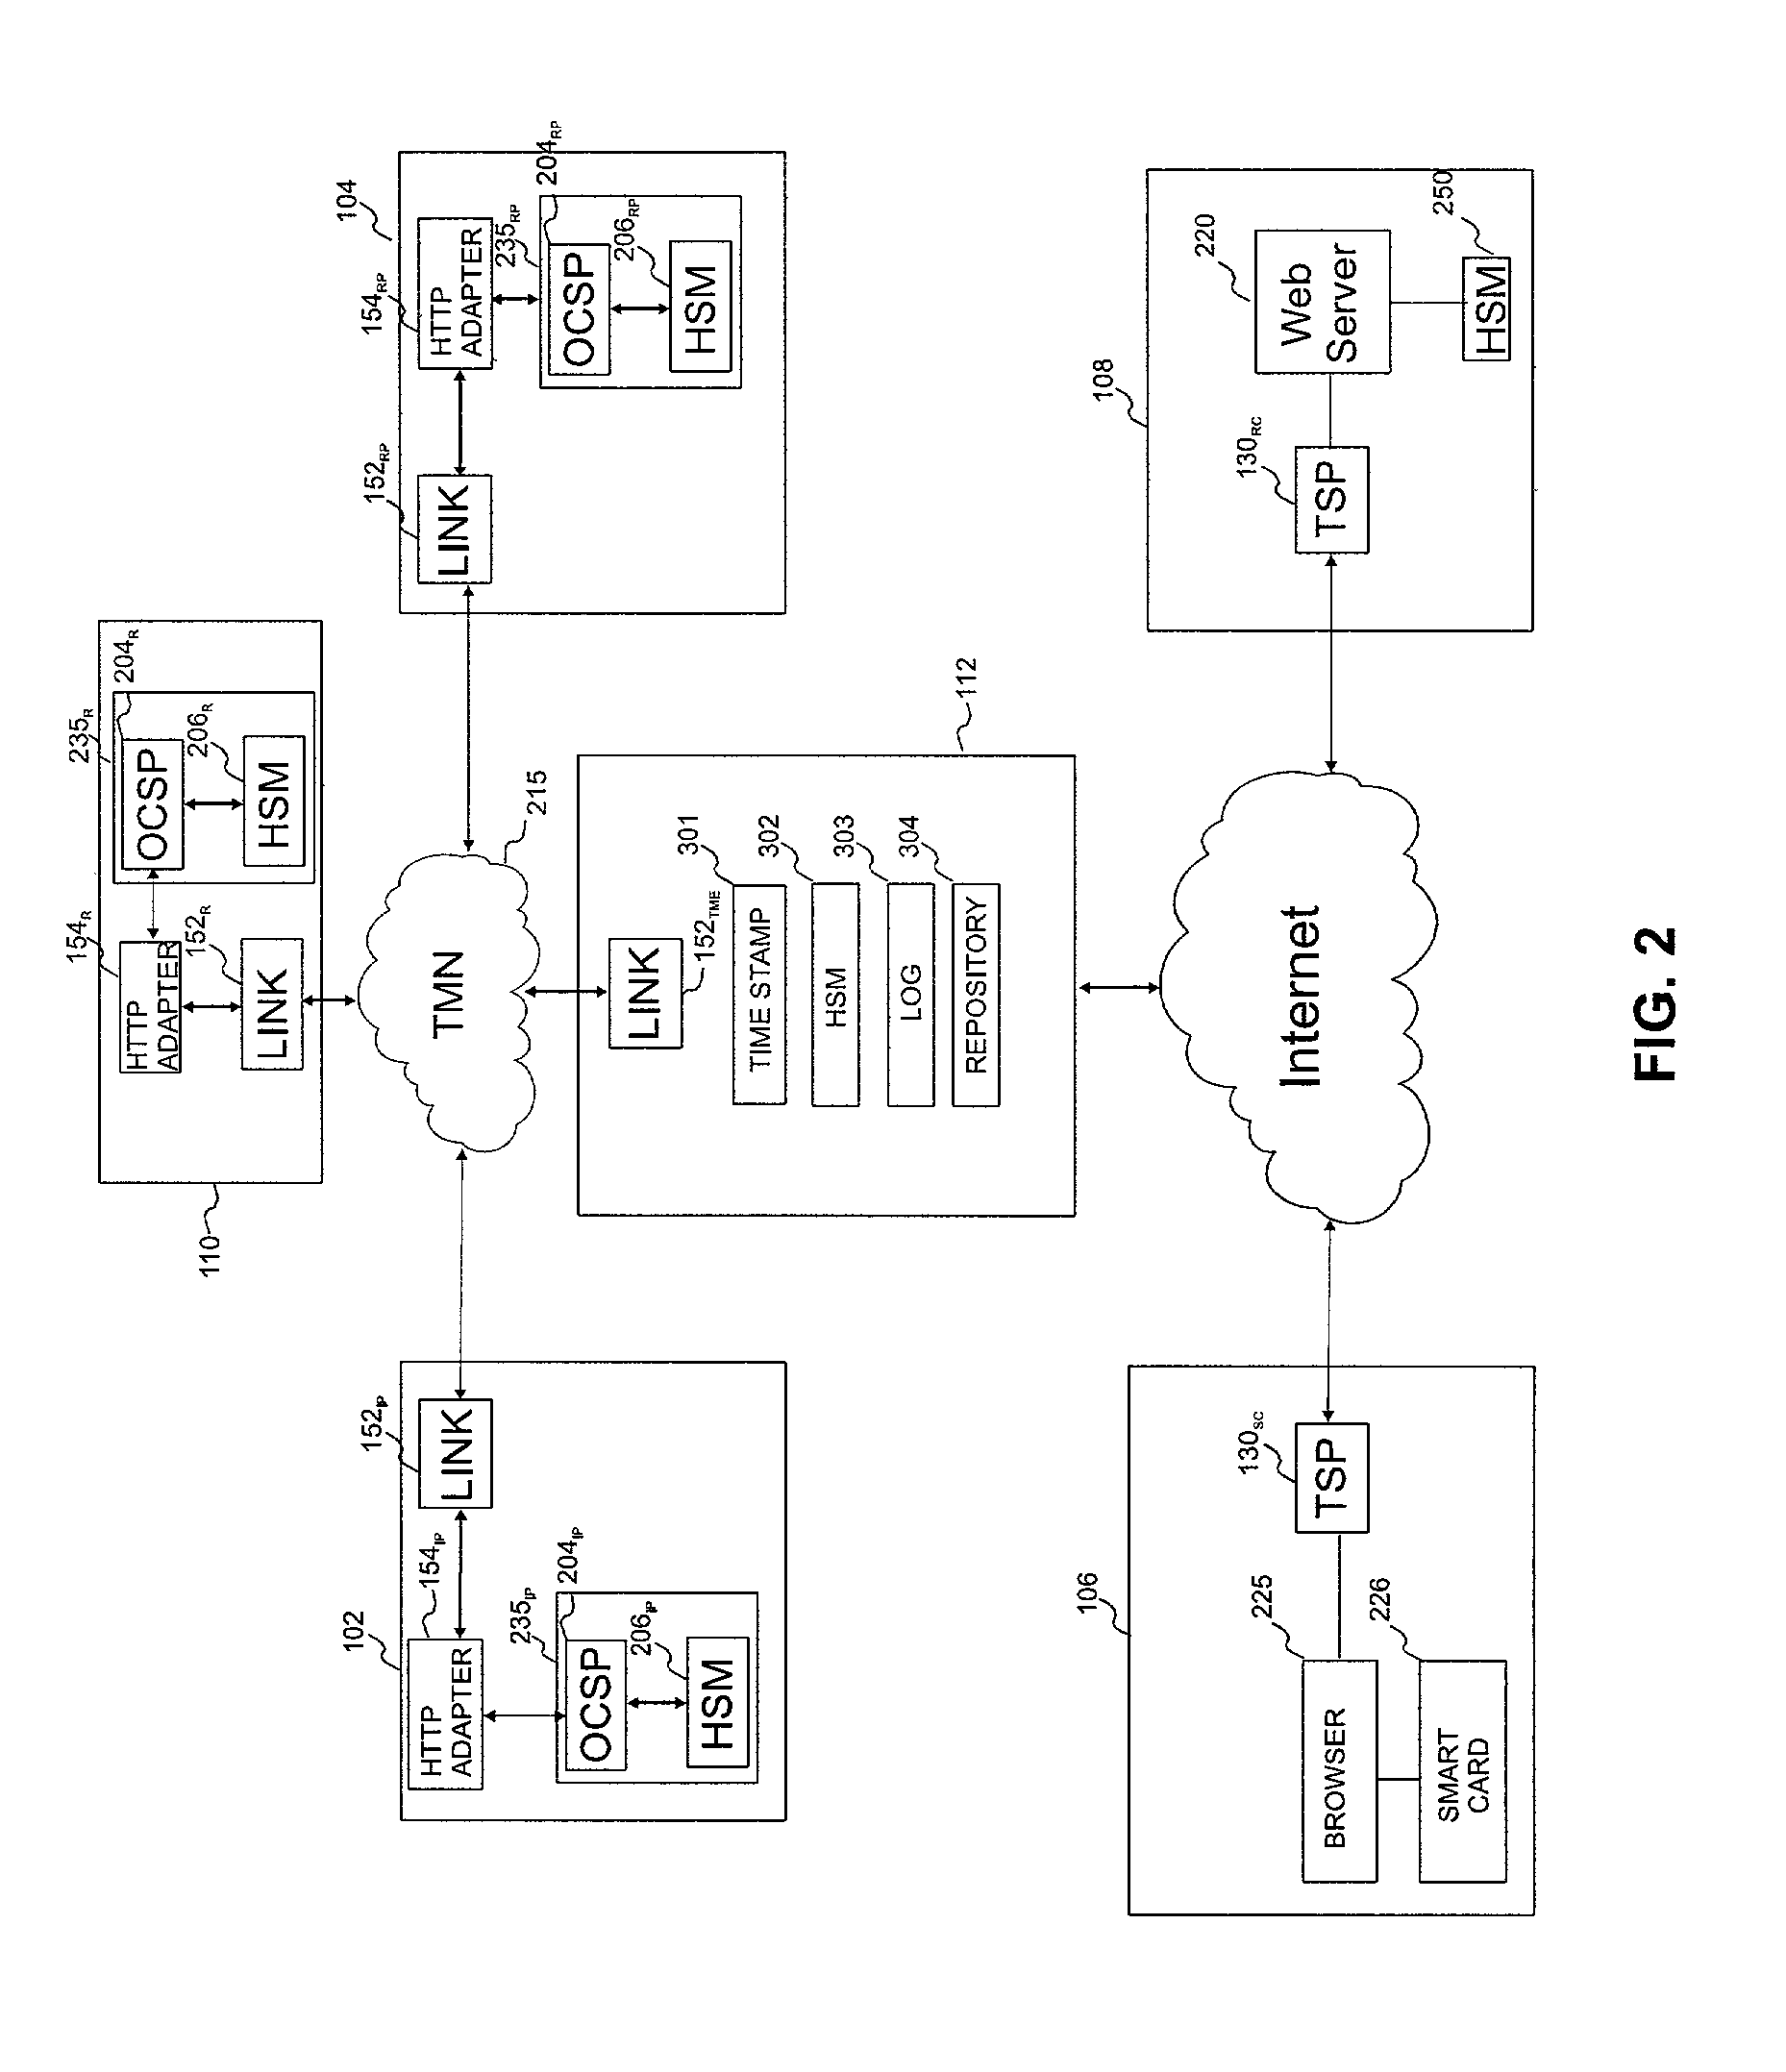 System and method for transparently providing certificate validation and other services within an electronic transaction